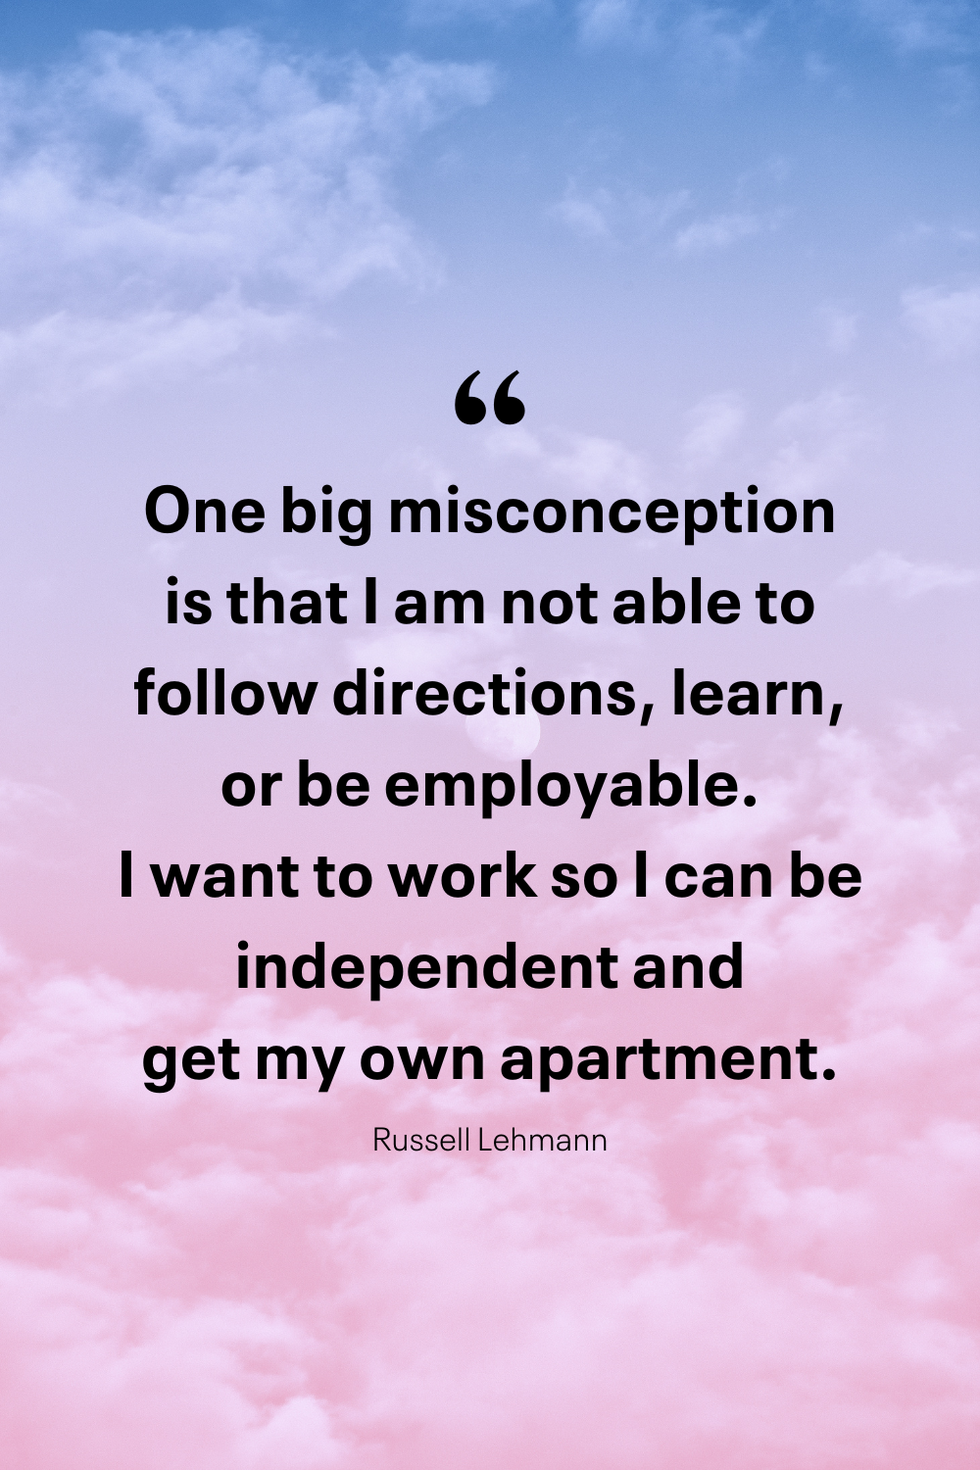 one big misconception is that i am not able to follow directions, learn, or be employable i want to work so i can be independent and get my own apartment, russell lehmann